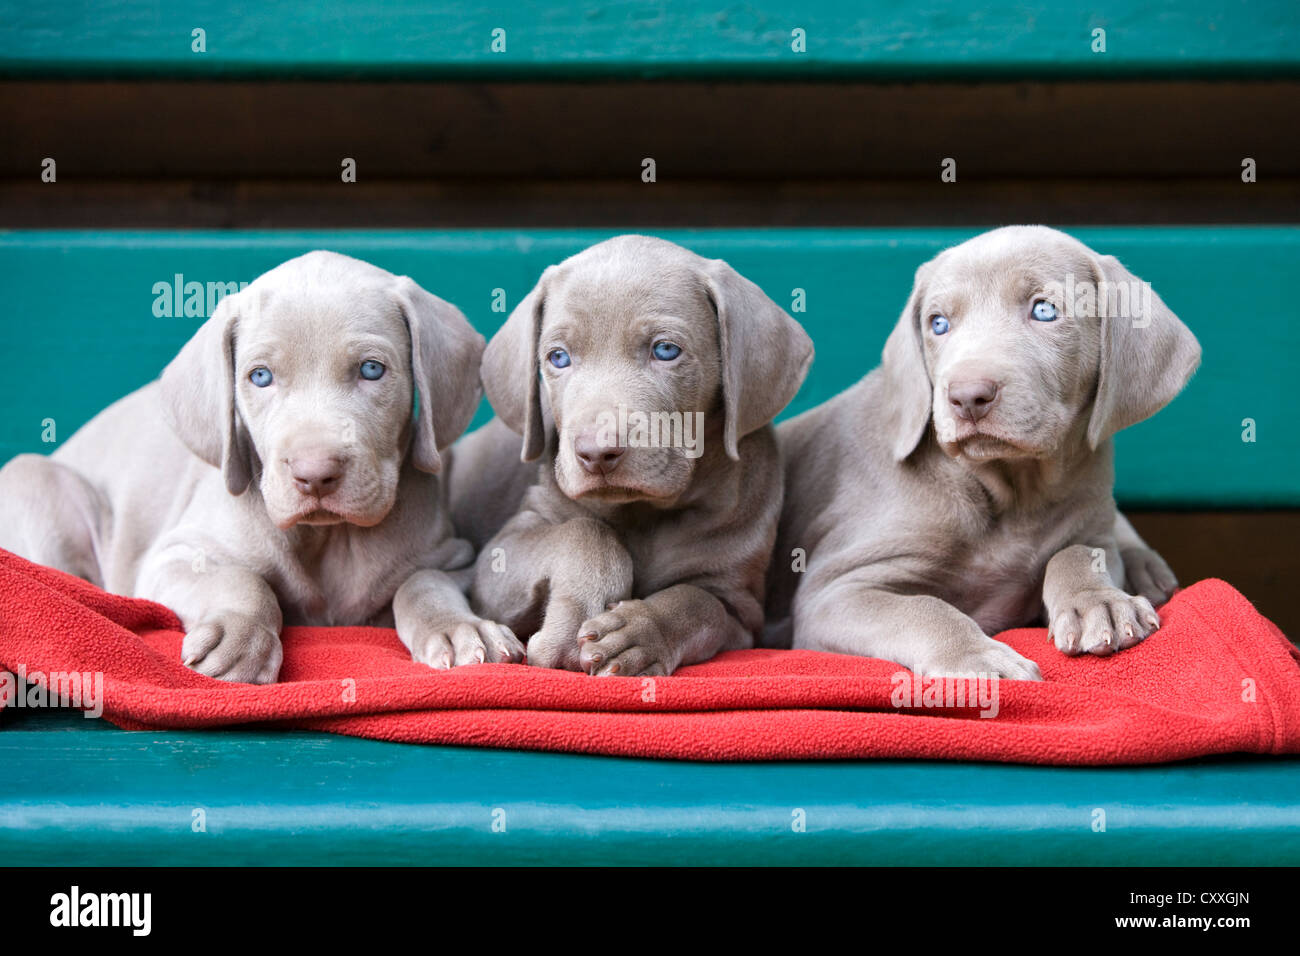 Weimaraner dogs, puppies, lying on a bench, North Tyrol, Austria, Europe Stock Photo